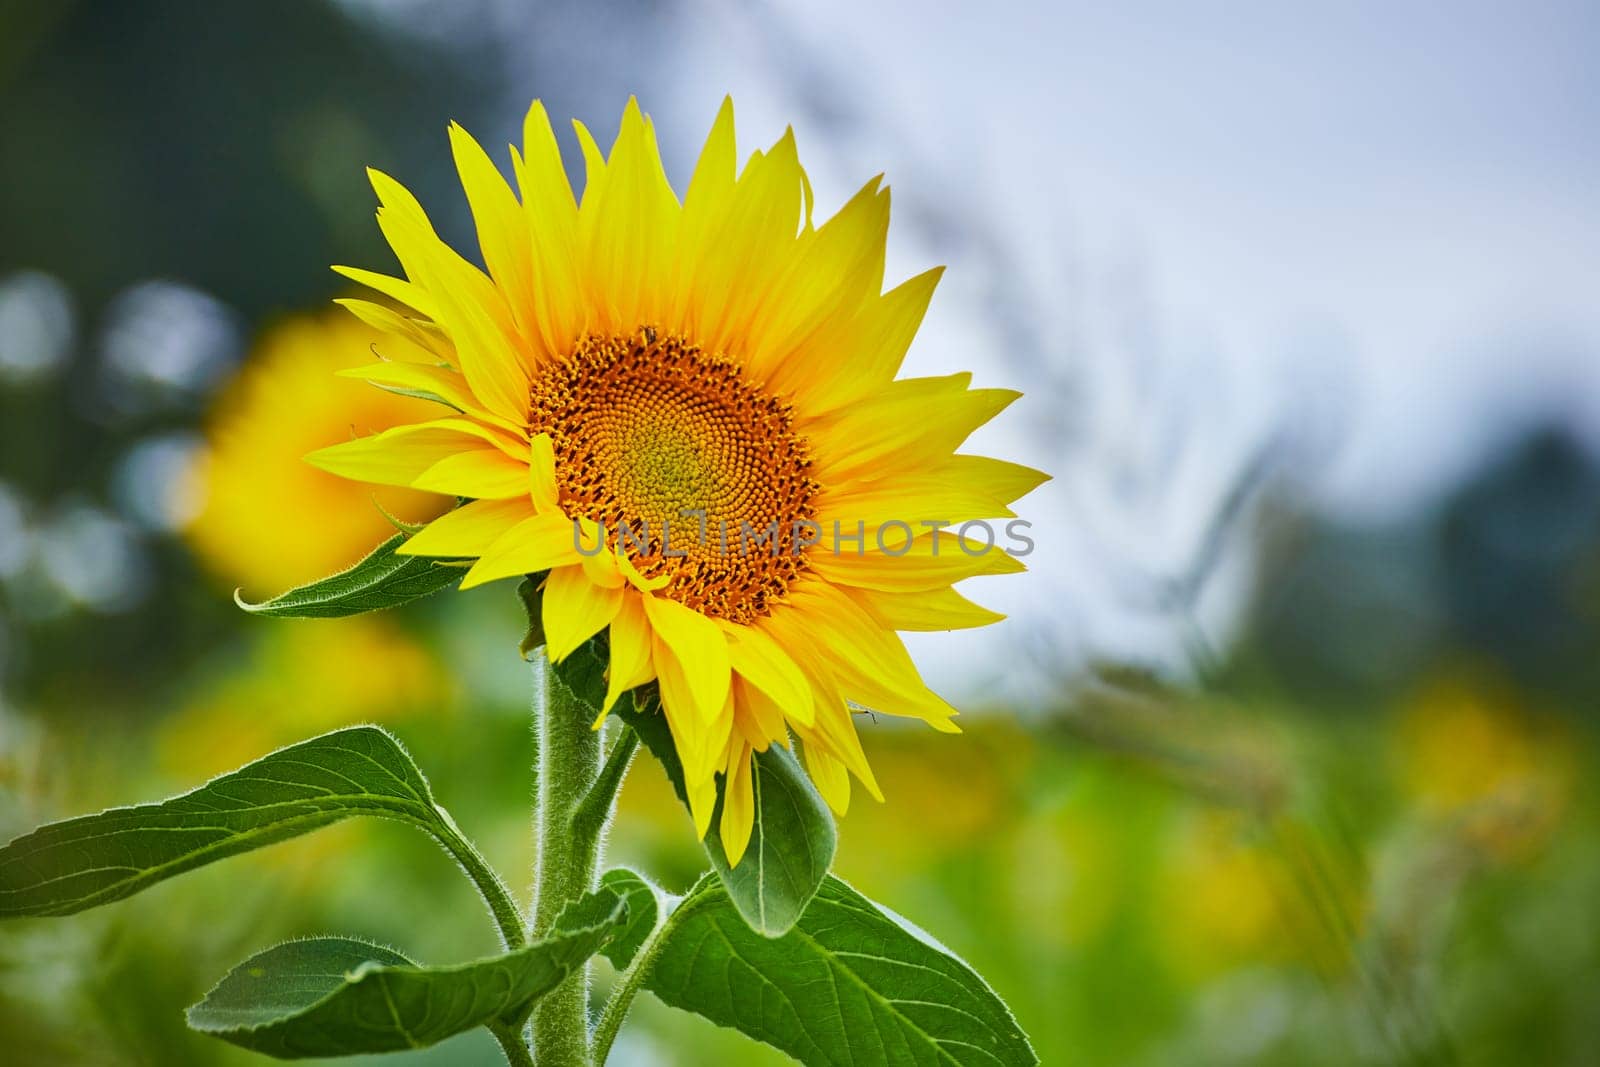 Vibrant Sunflower Close-Up in Goshen Field, Soft Natural Light by njproductions